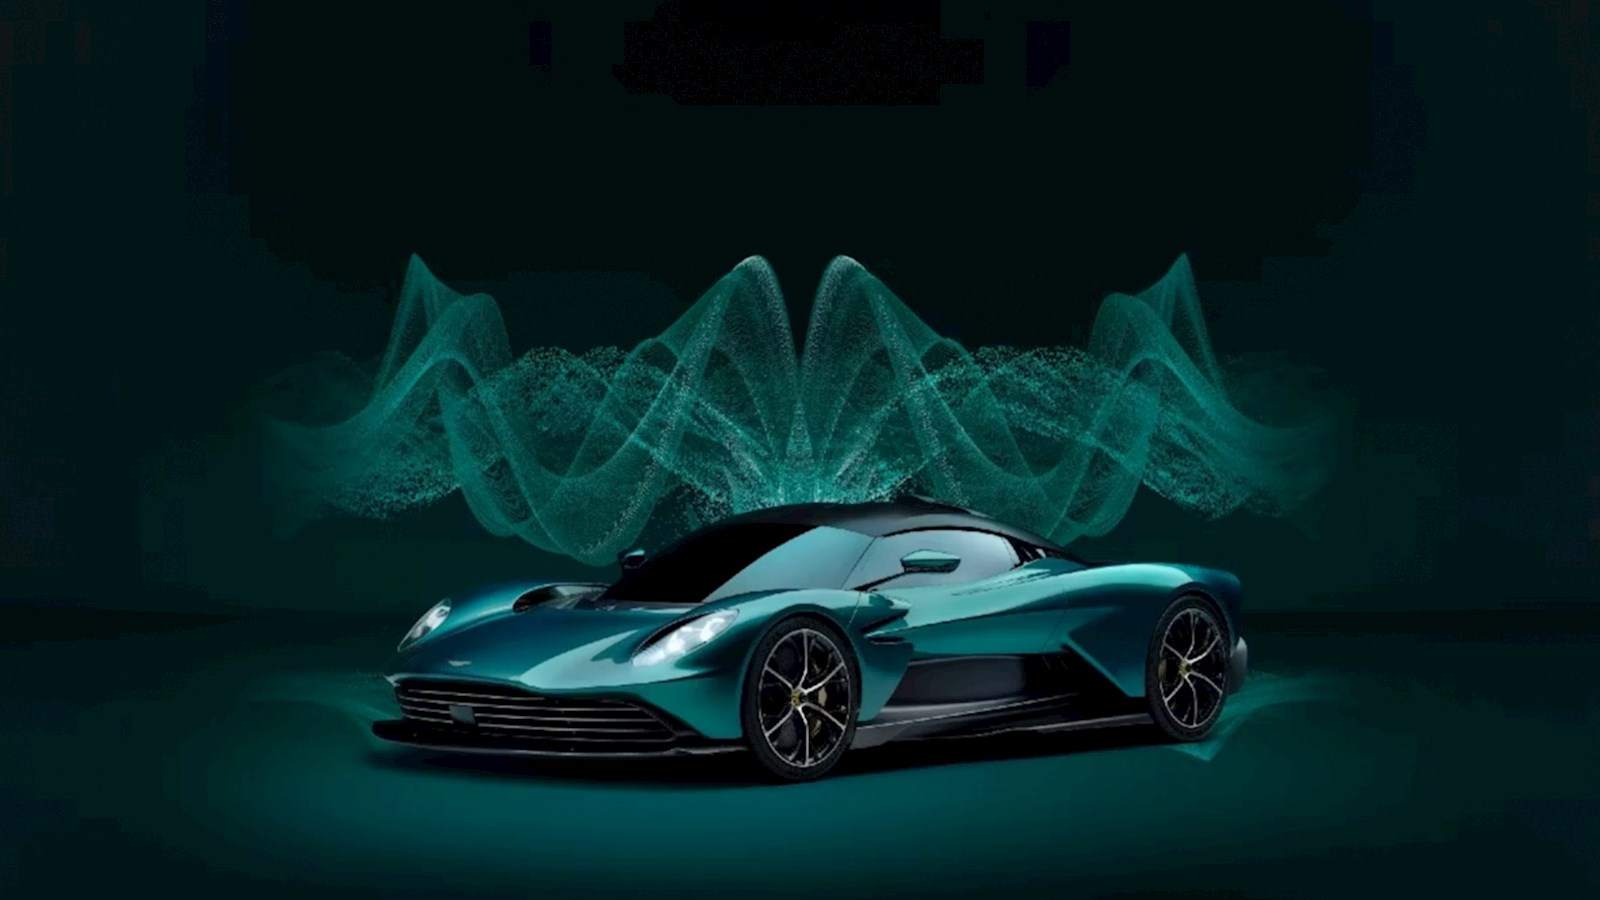 Green Aston Martin Valkyirie car on a green background with glowing green and pulsating visualisations in the background